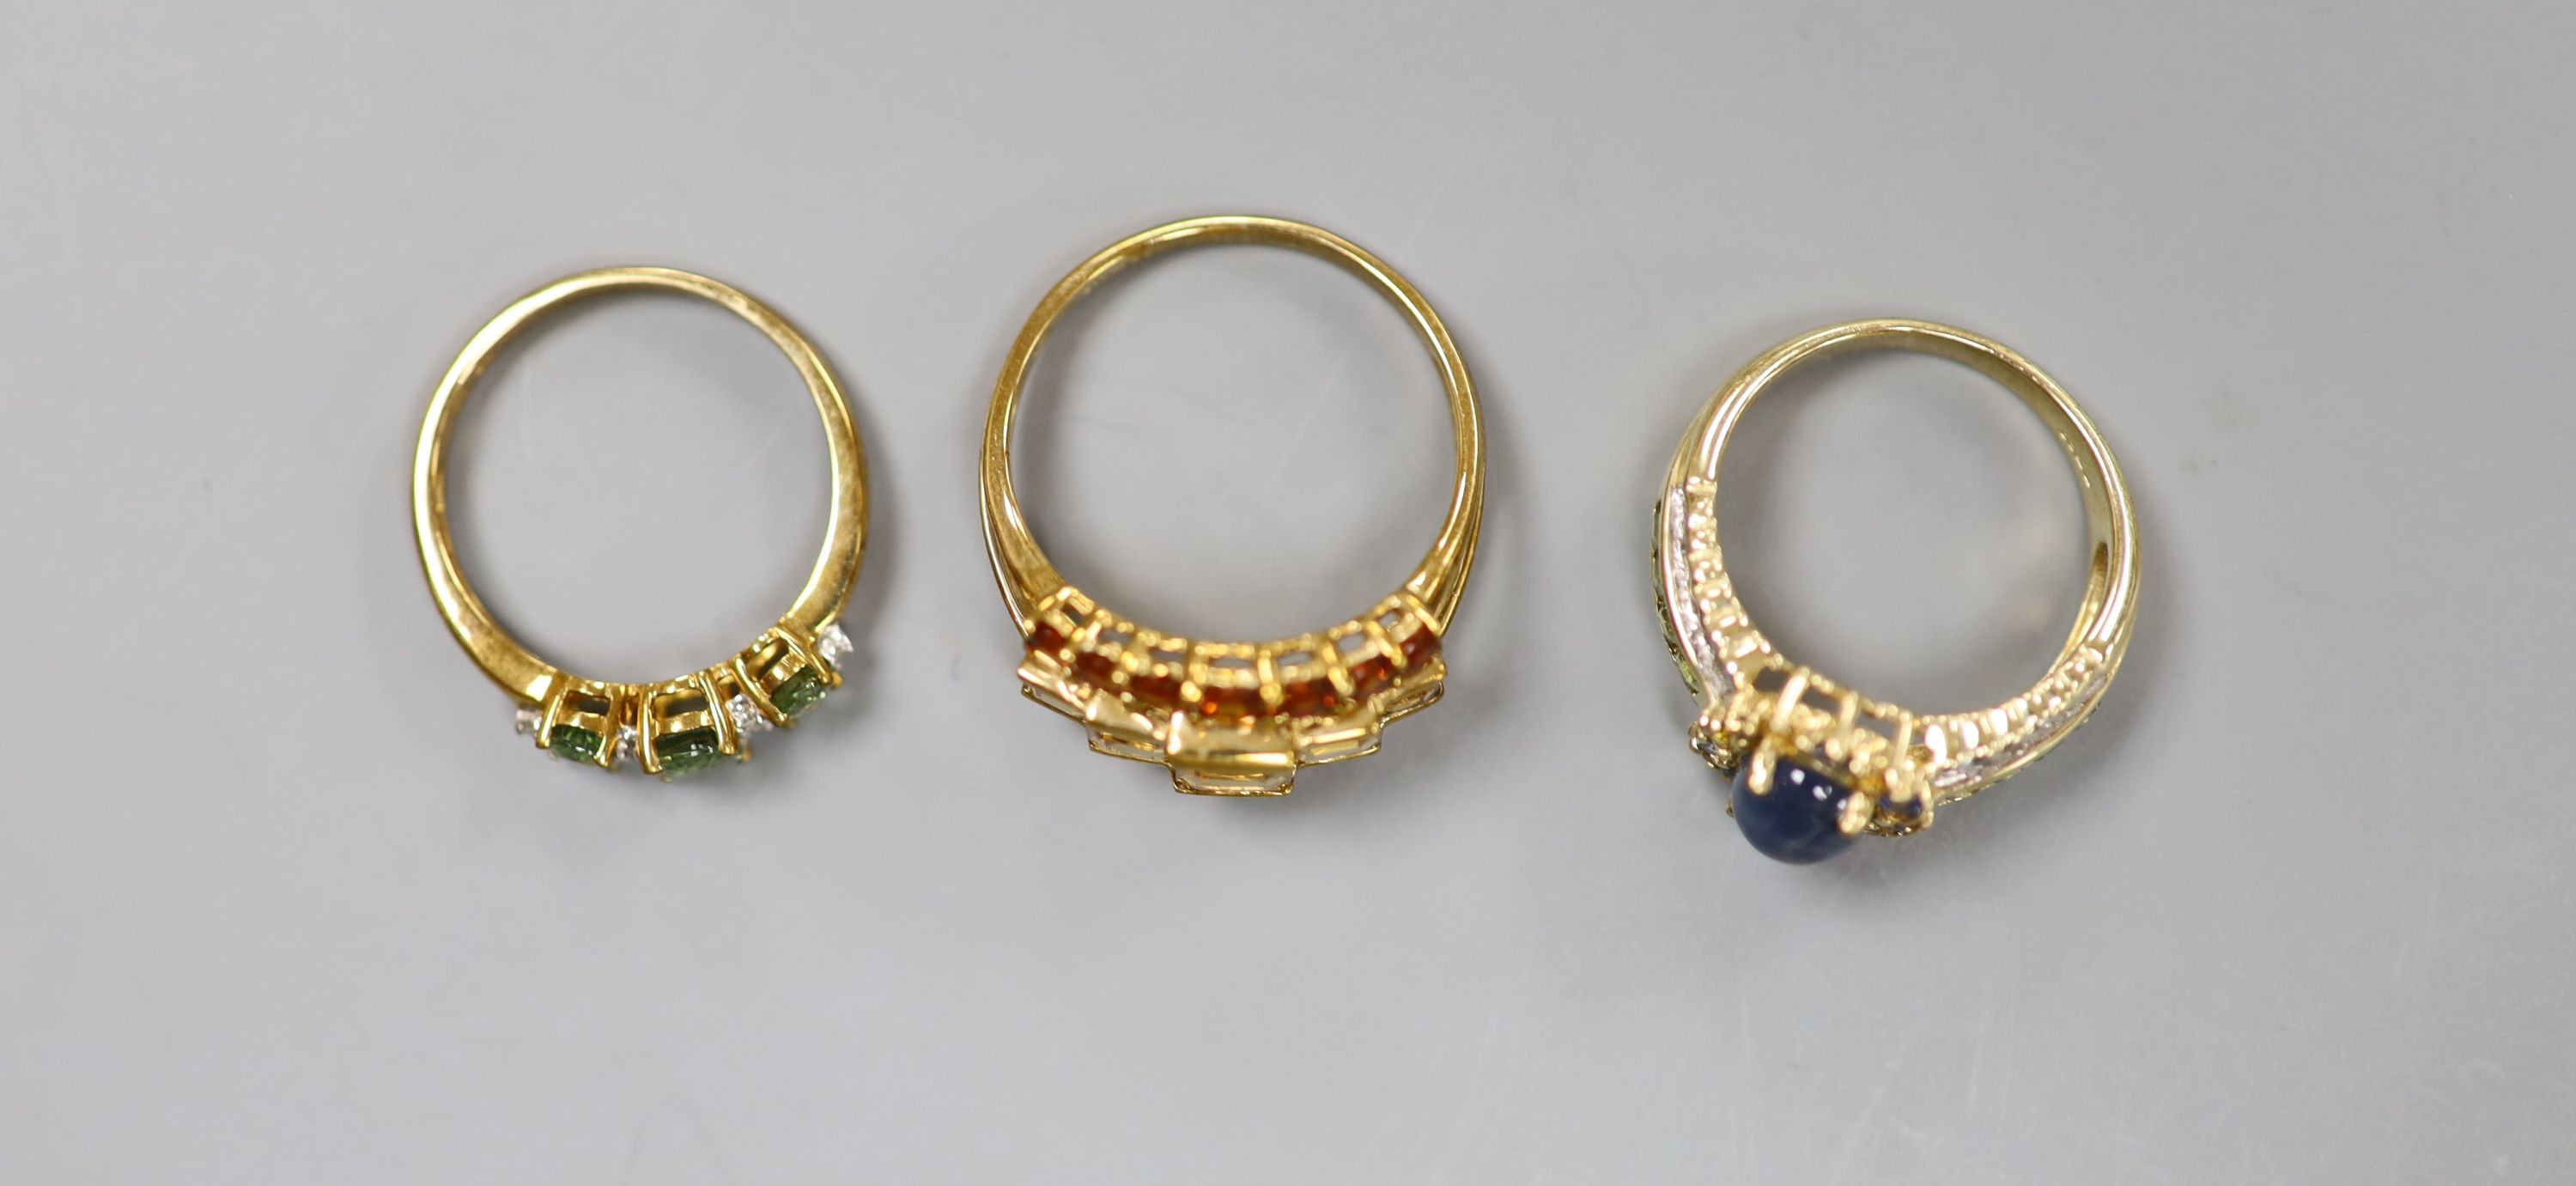 A 9ct gold cabochon sapphire and diamond ring and two other 9ct gold gem-set rings